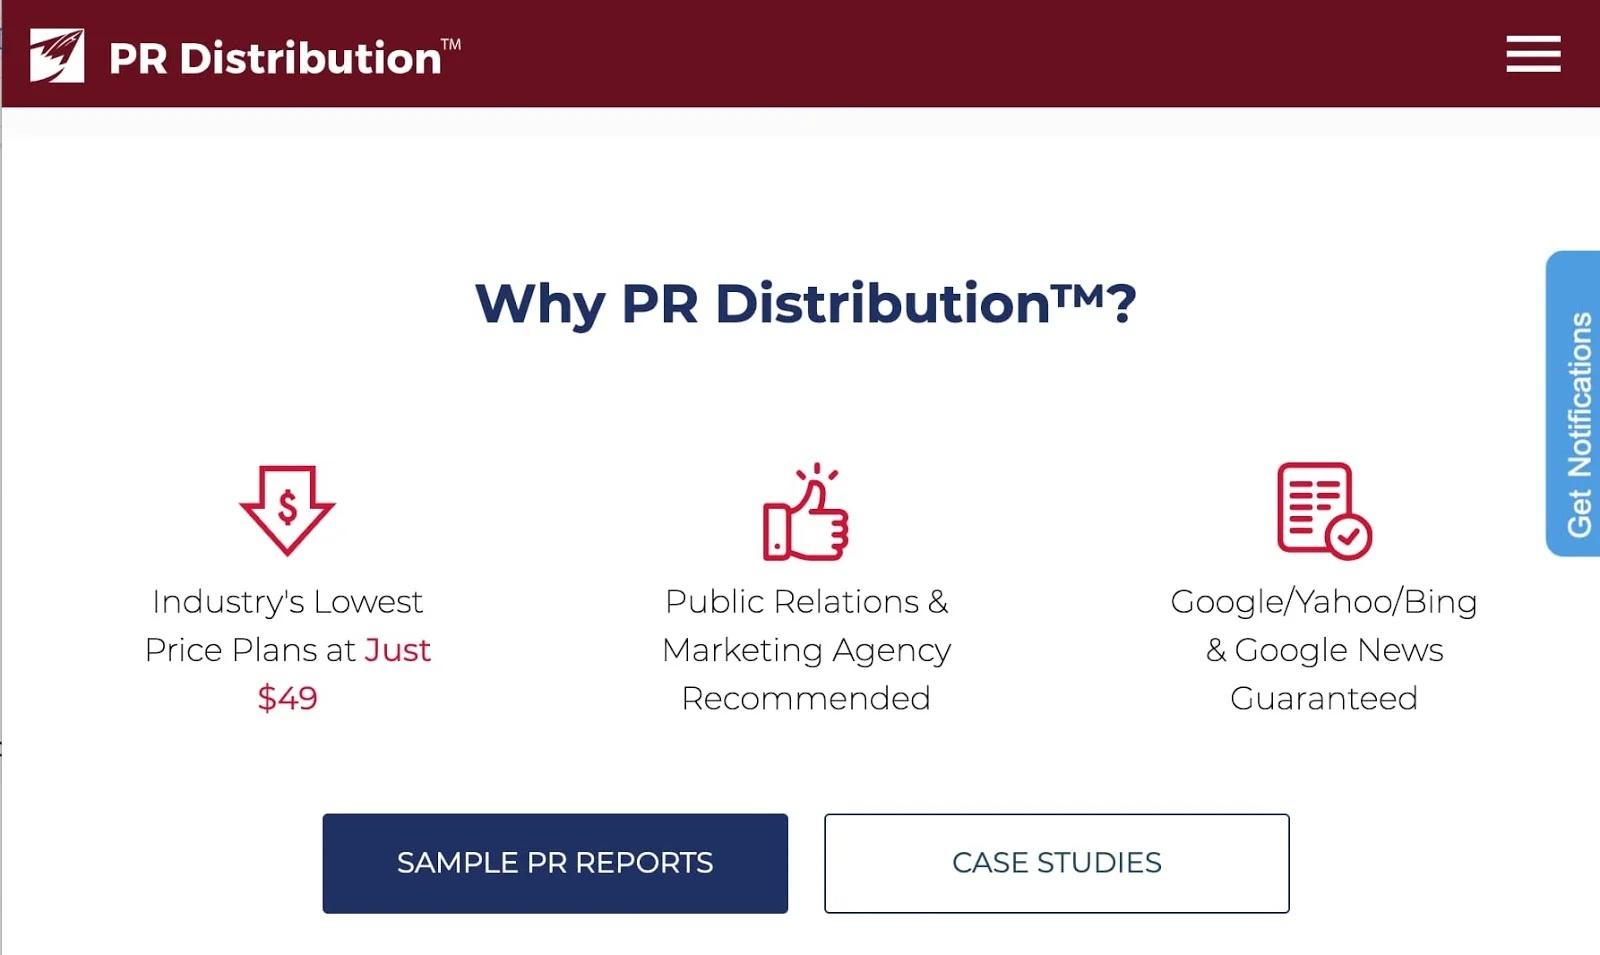 press release distribution 14 - Press Release Distribution: Top 11 Services + 4 Mistakes to Avoid